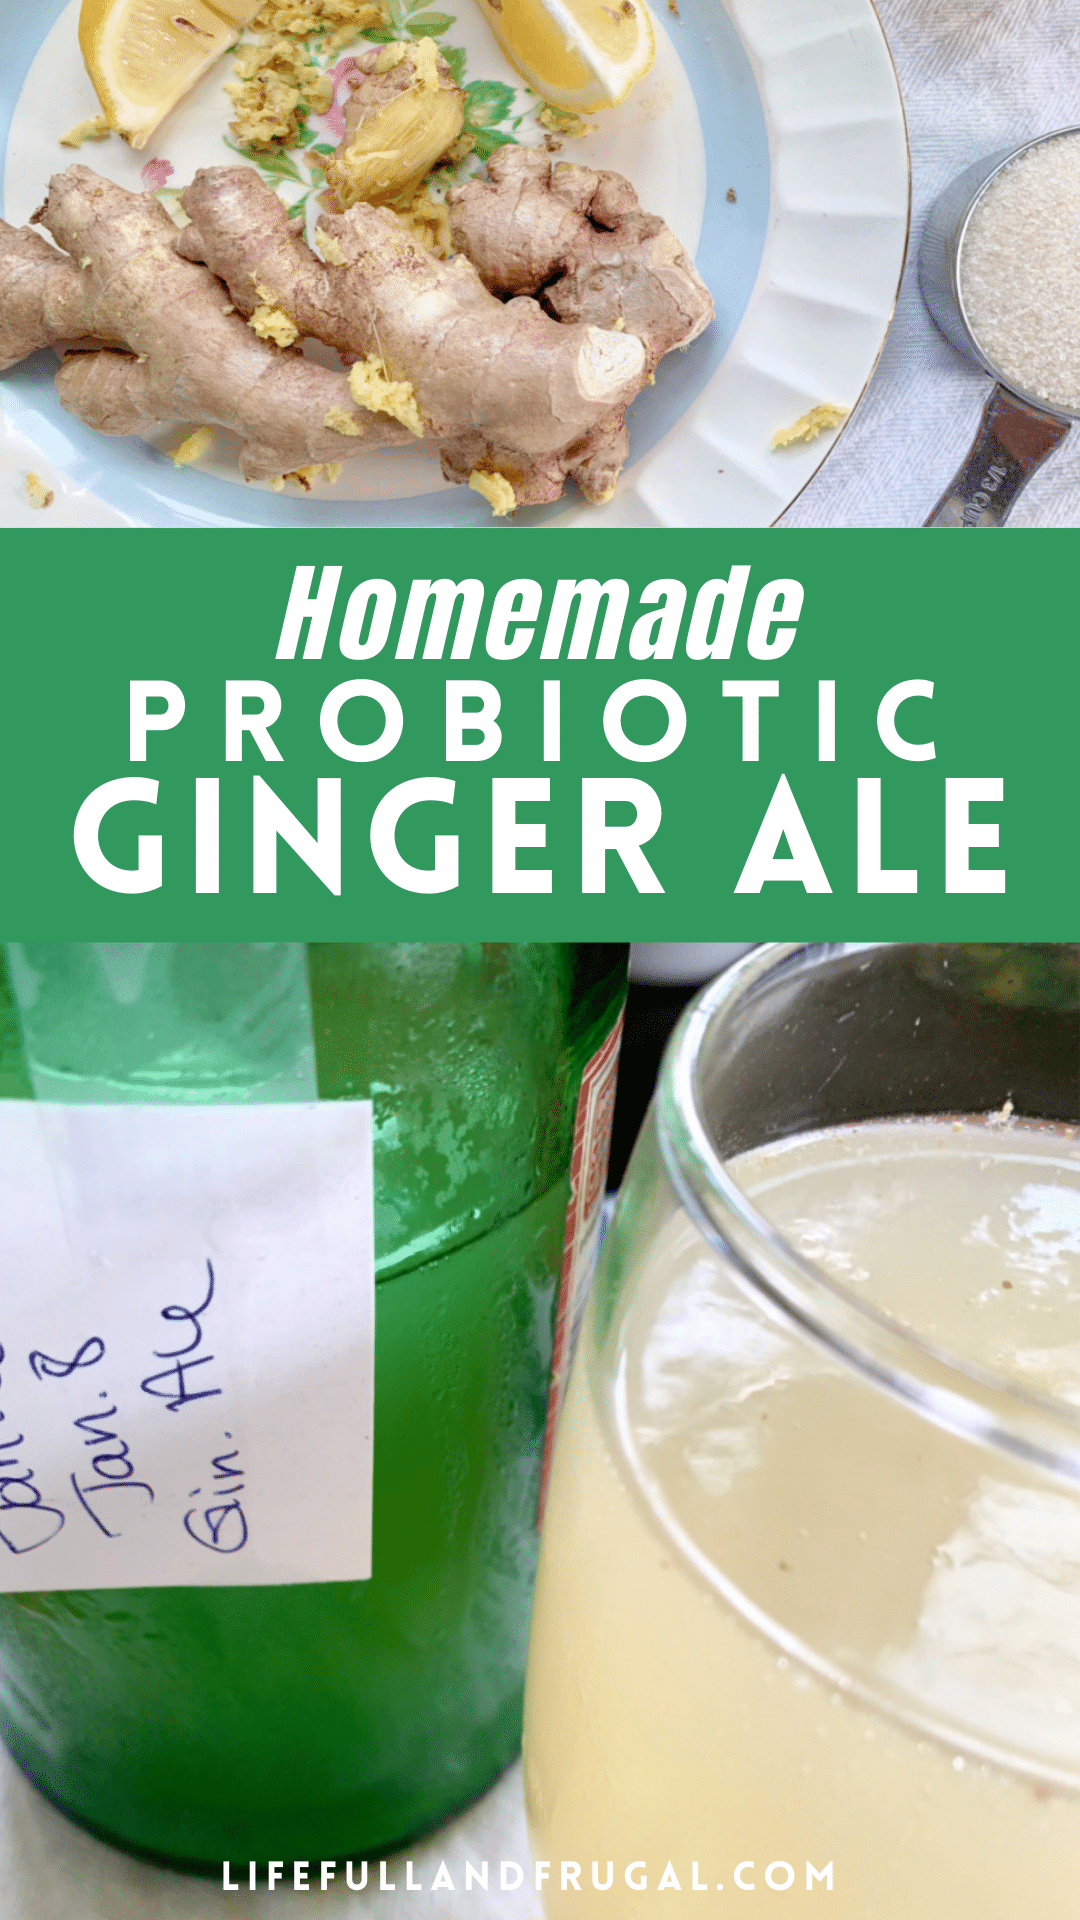 homemade probiotic ginger ale Pinterest life full and frugal